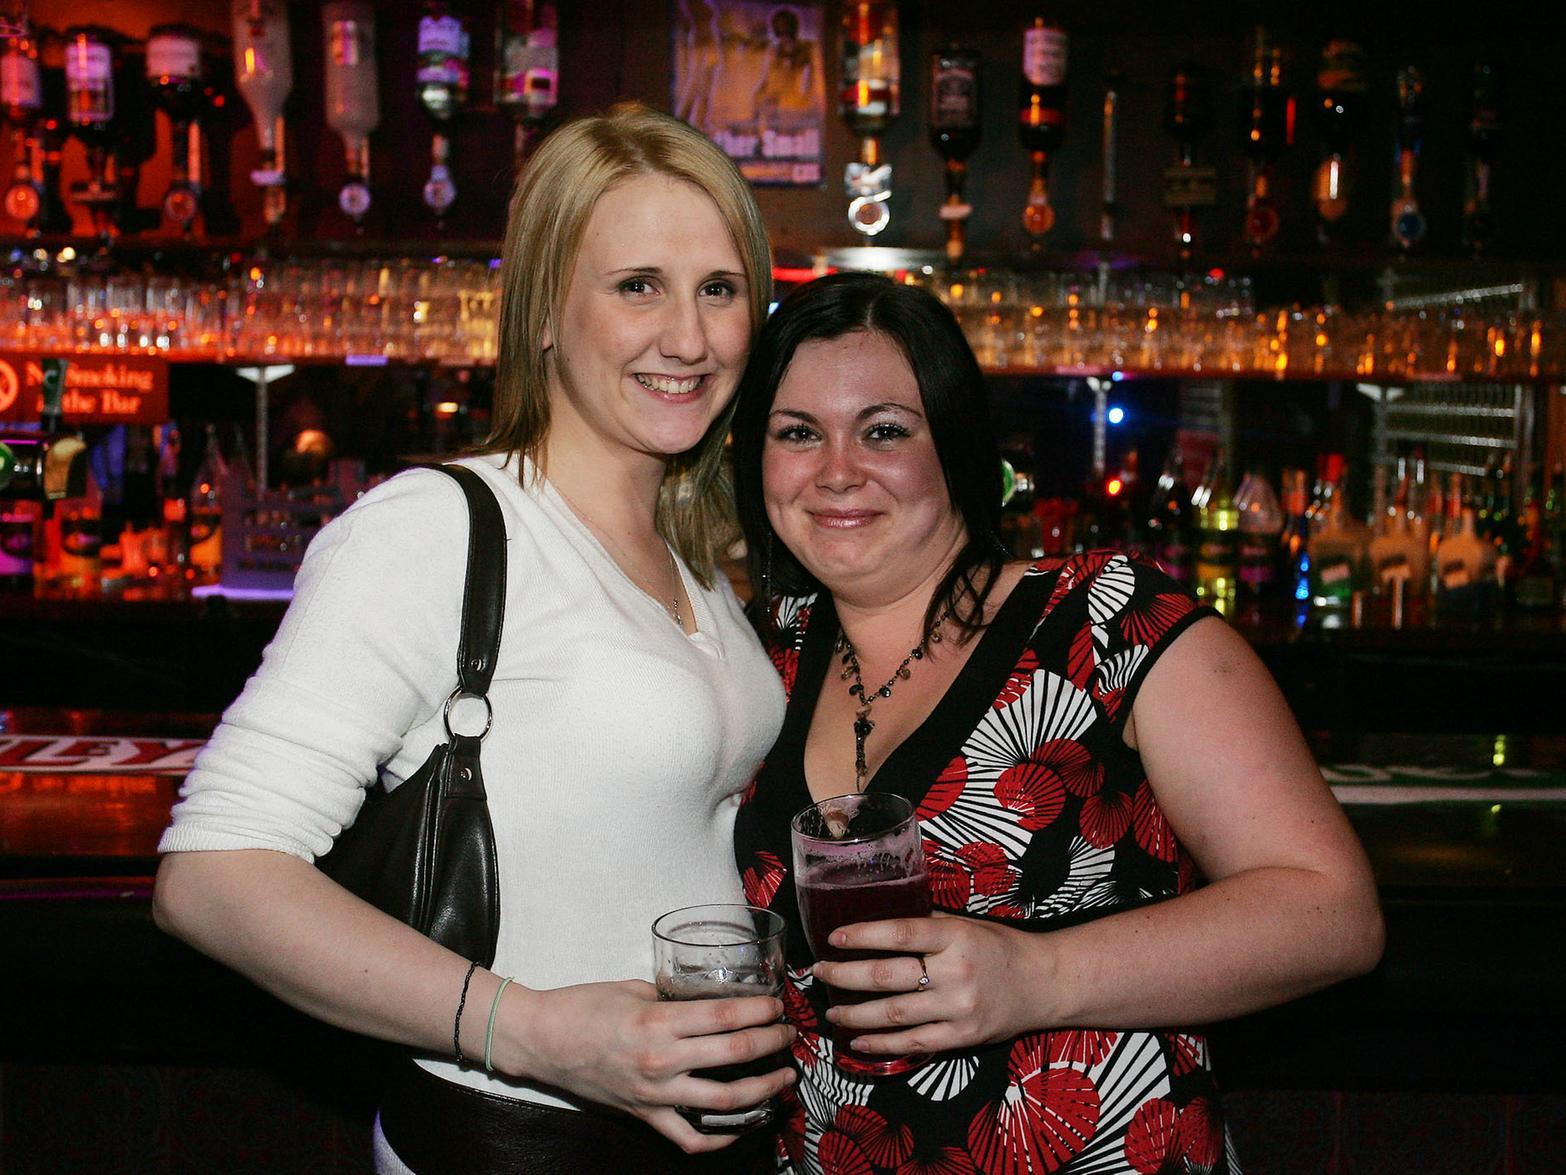 Friends Vicki Egan and Laura Carter enjoy a night out.